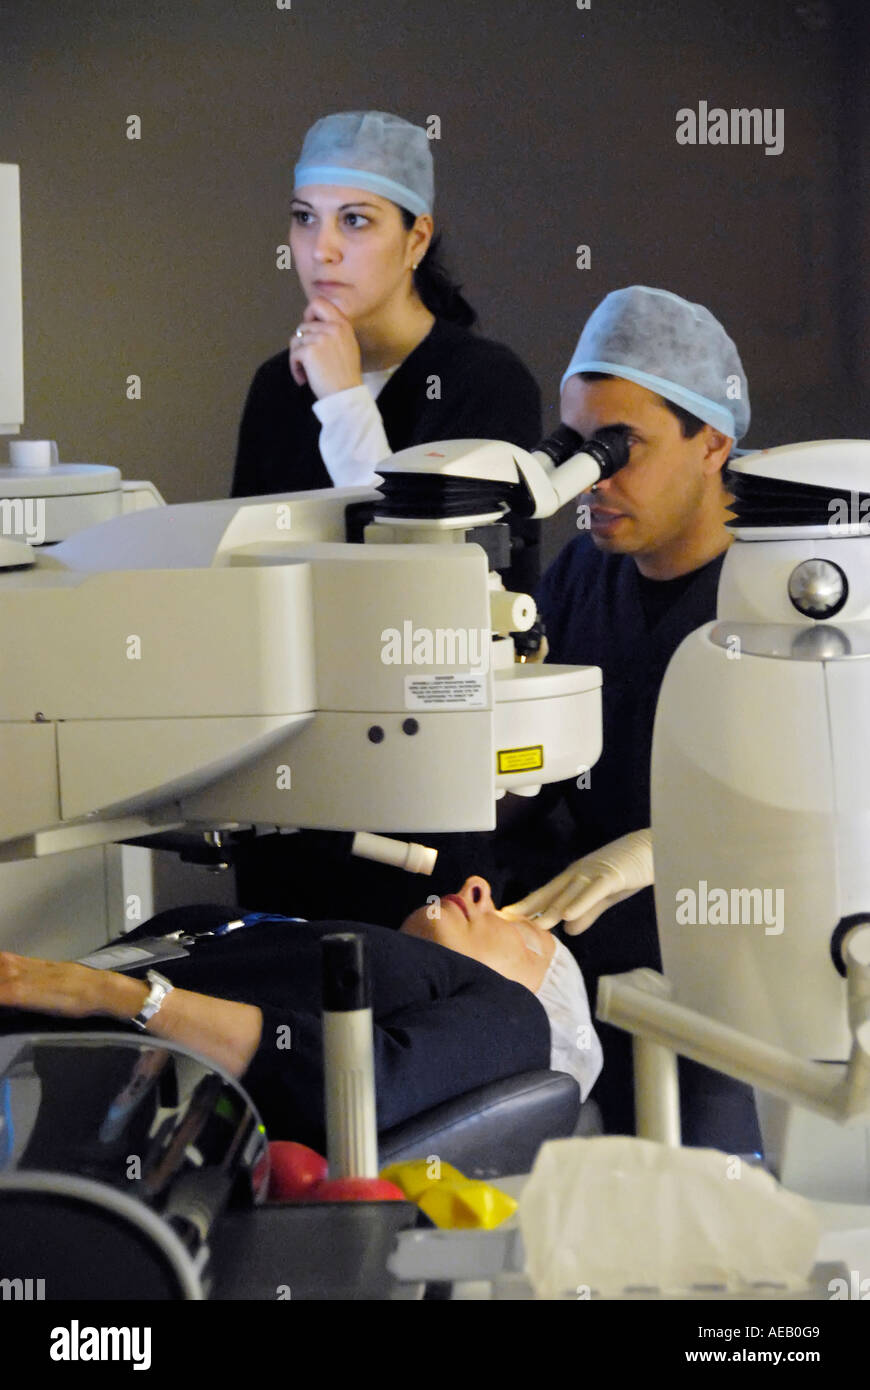 PRK and Lasik laser eye surgery is state of the art vision correction and surgical operation is performed at a laser eye center Stock Photo